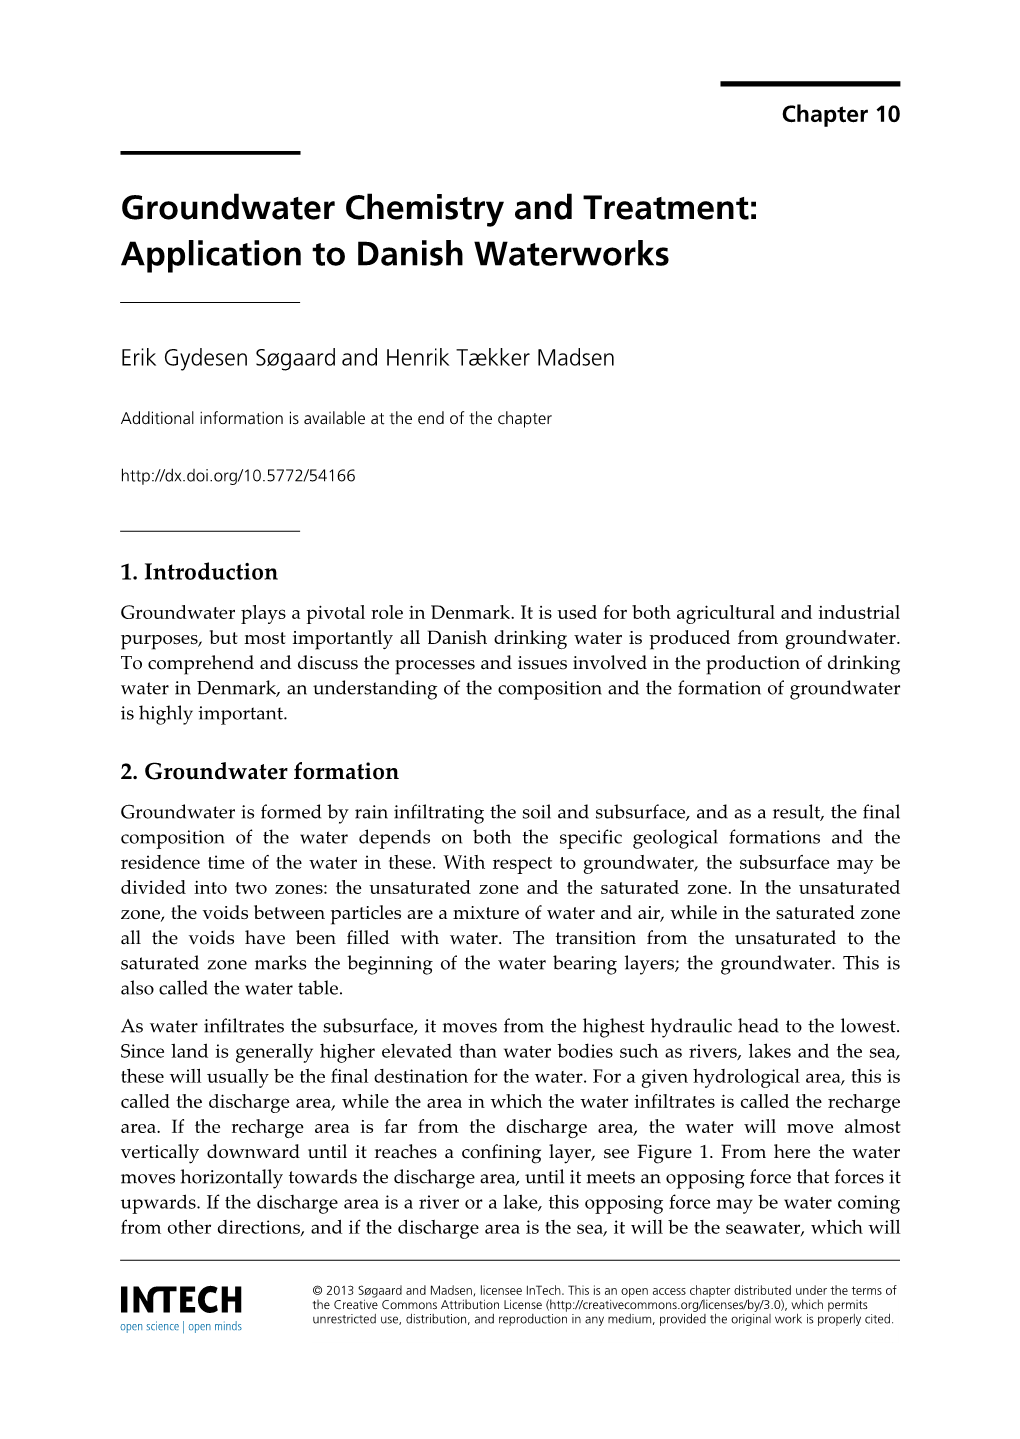 Groundwater Chemistry and Treatment: Application to Danish Waterworks